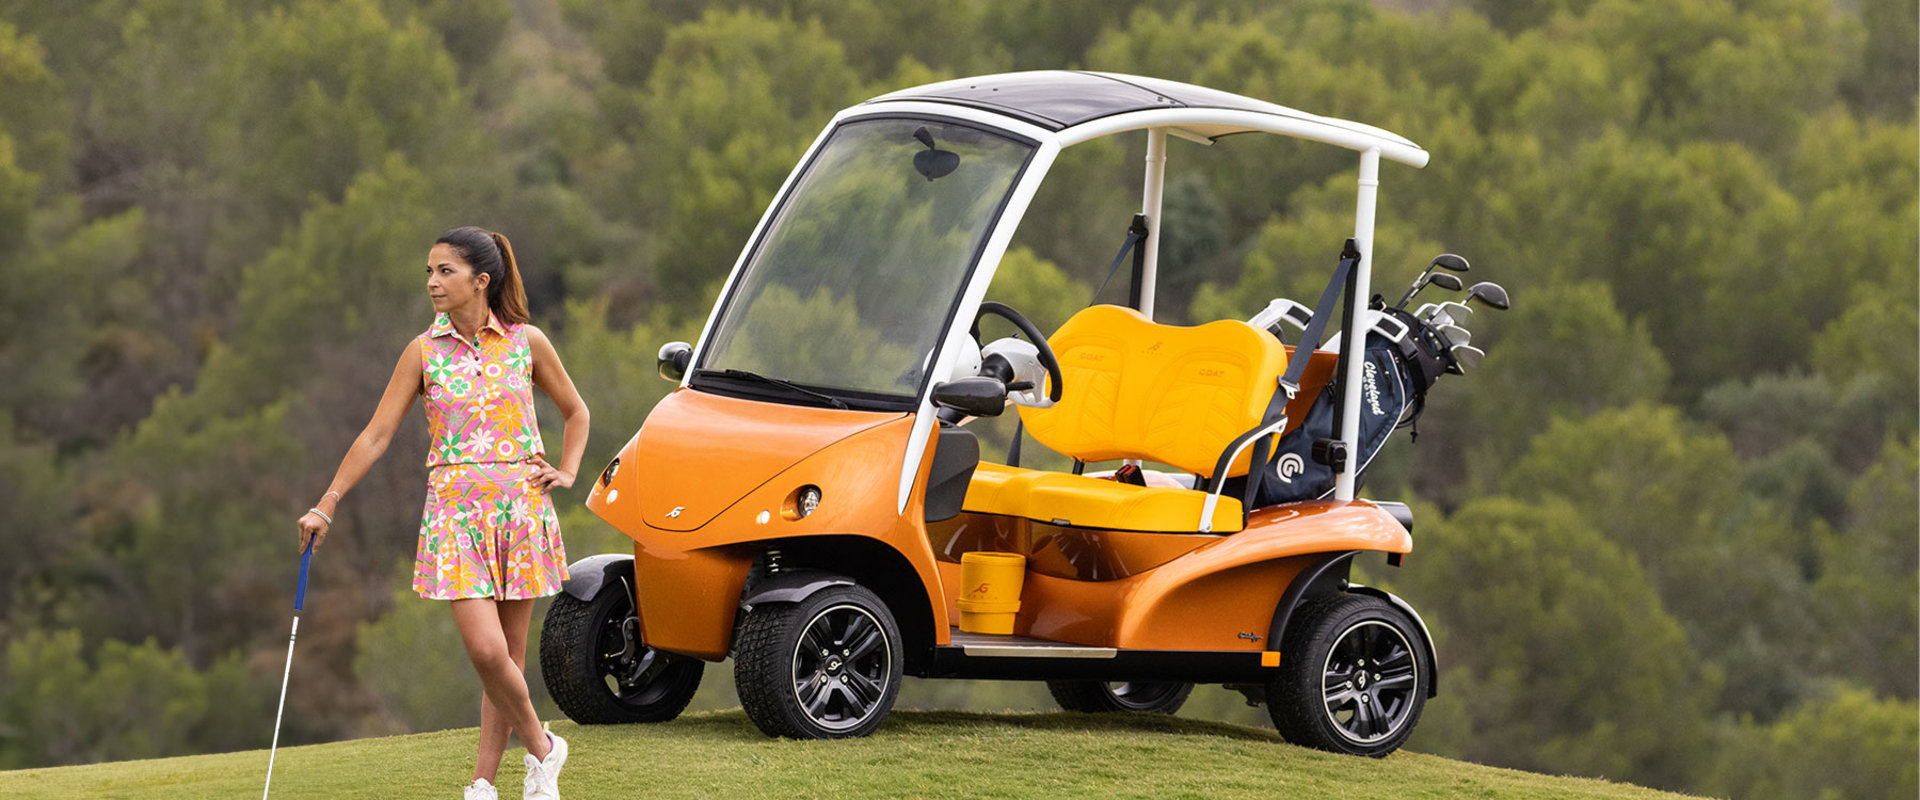 Bringing Your Own Golf Cart to Golf Events in Fulton County, GA